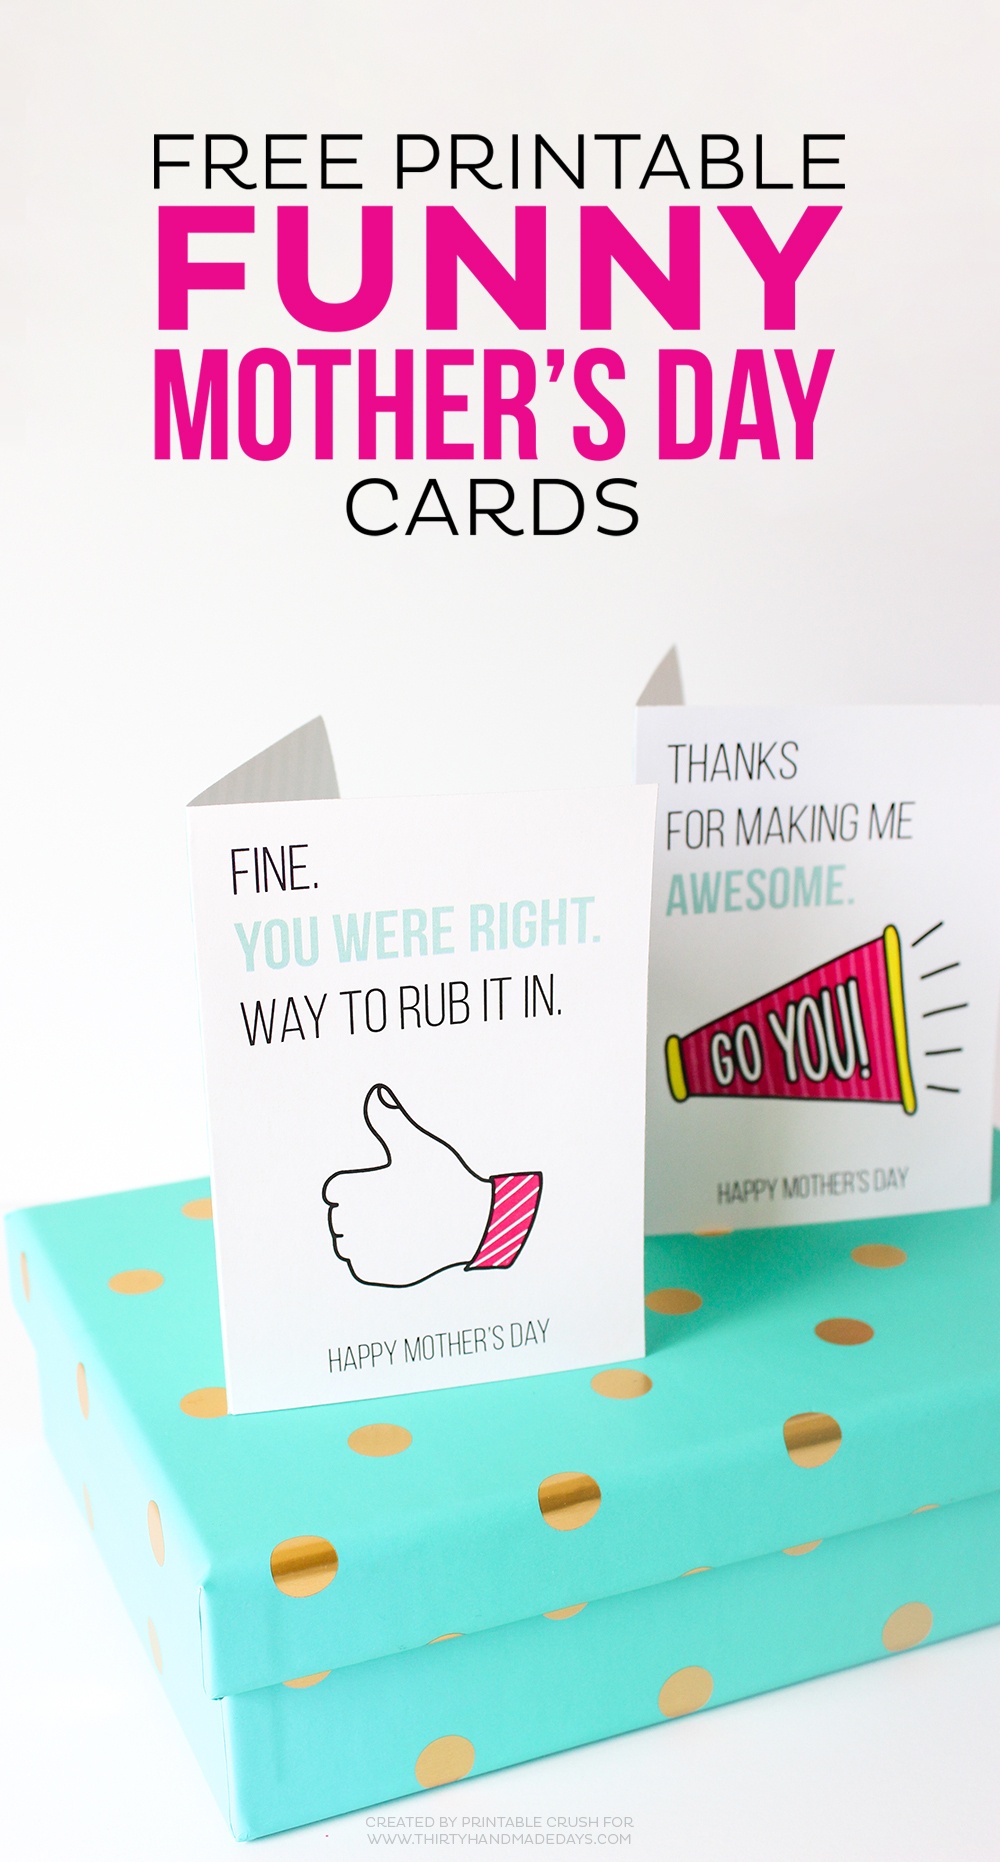 Printable Mother&amp;#039;s Day Cards - Free Funny Printable Cards